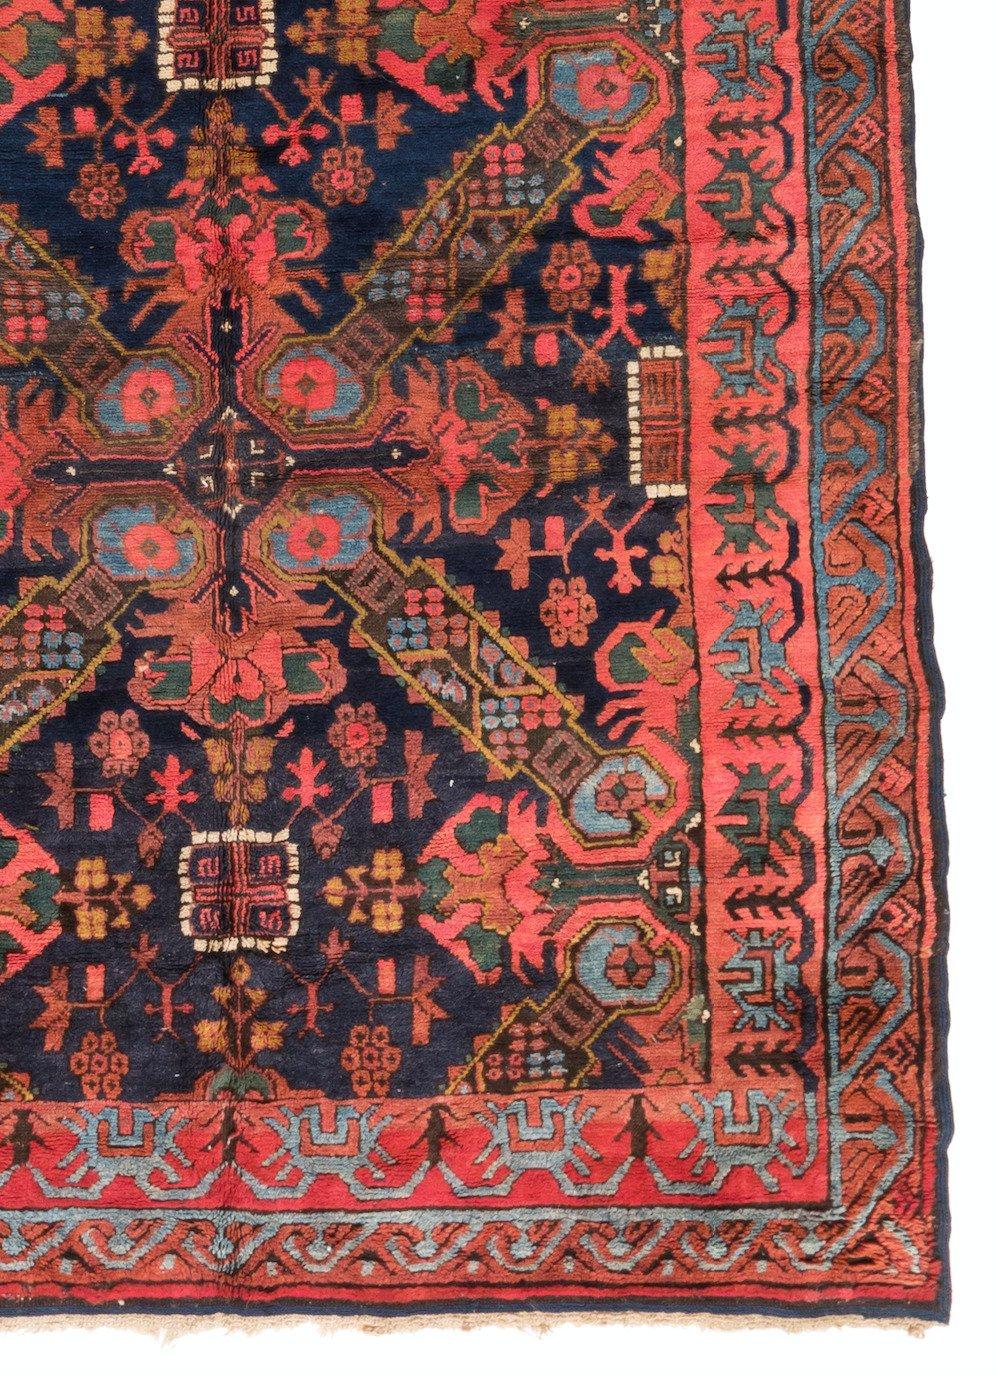 Hand-Woven Antique Caucasian Red Navy Blue Brown Floral Karabagh Area Rug, c. 1920s-1930s For Sale